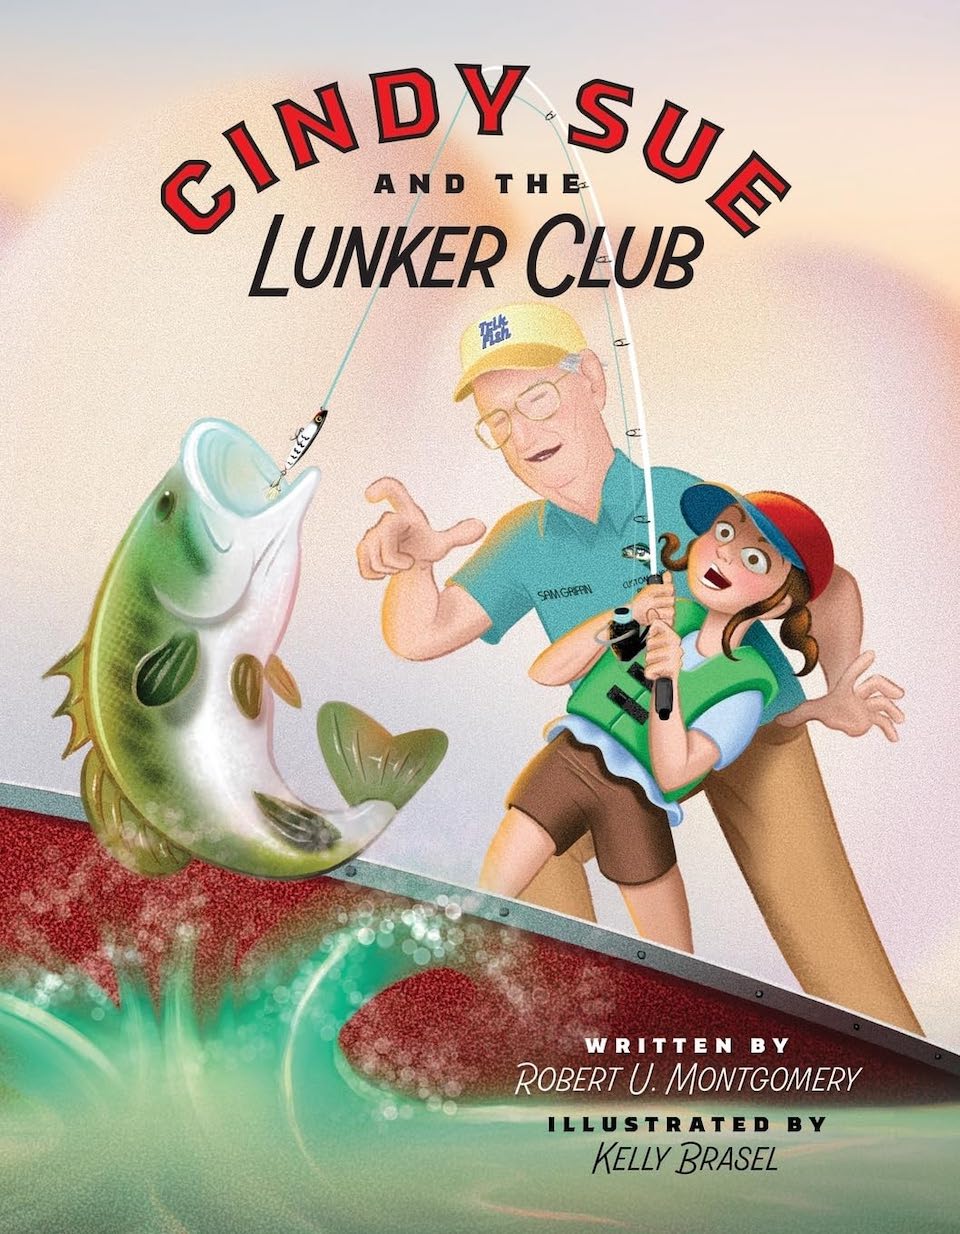 Sue and the Lunker Club book